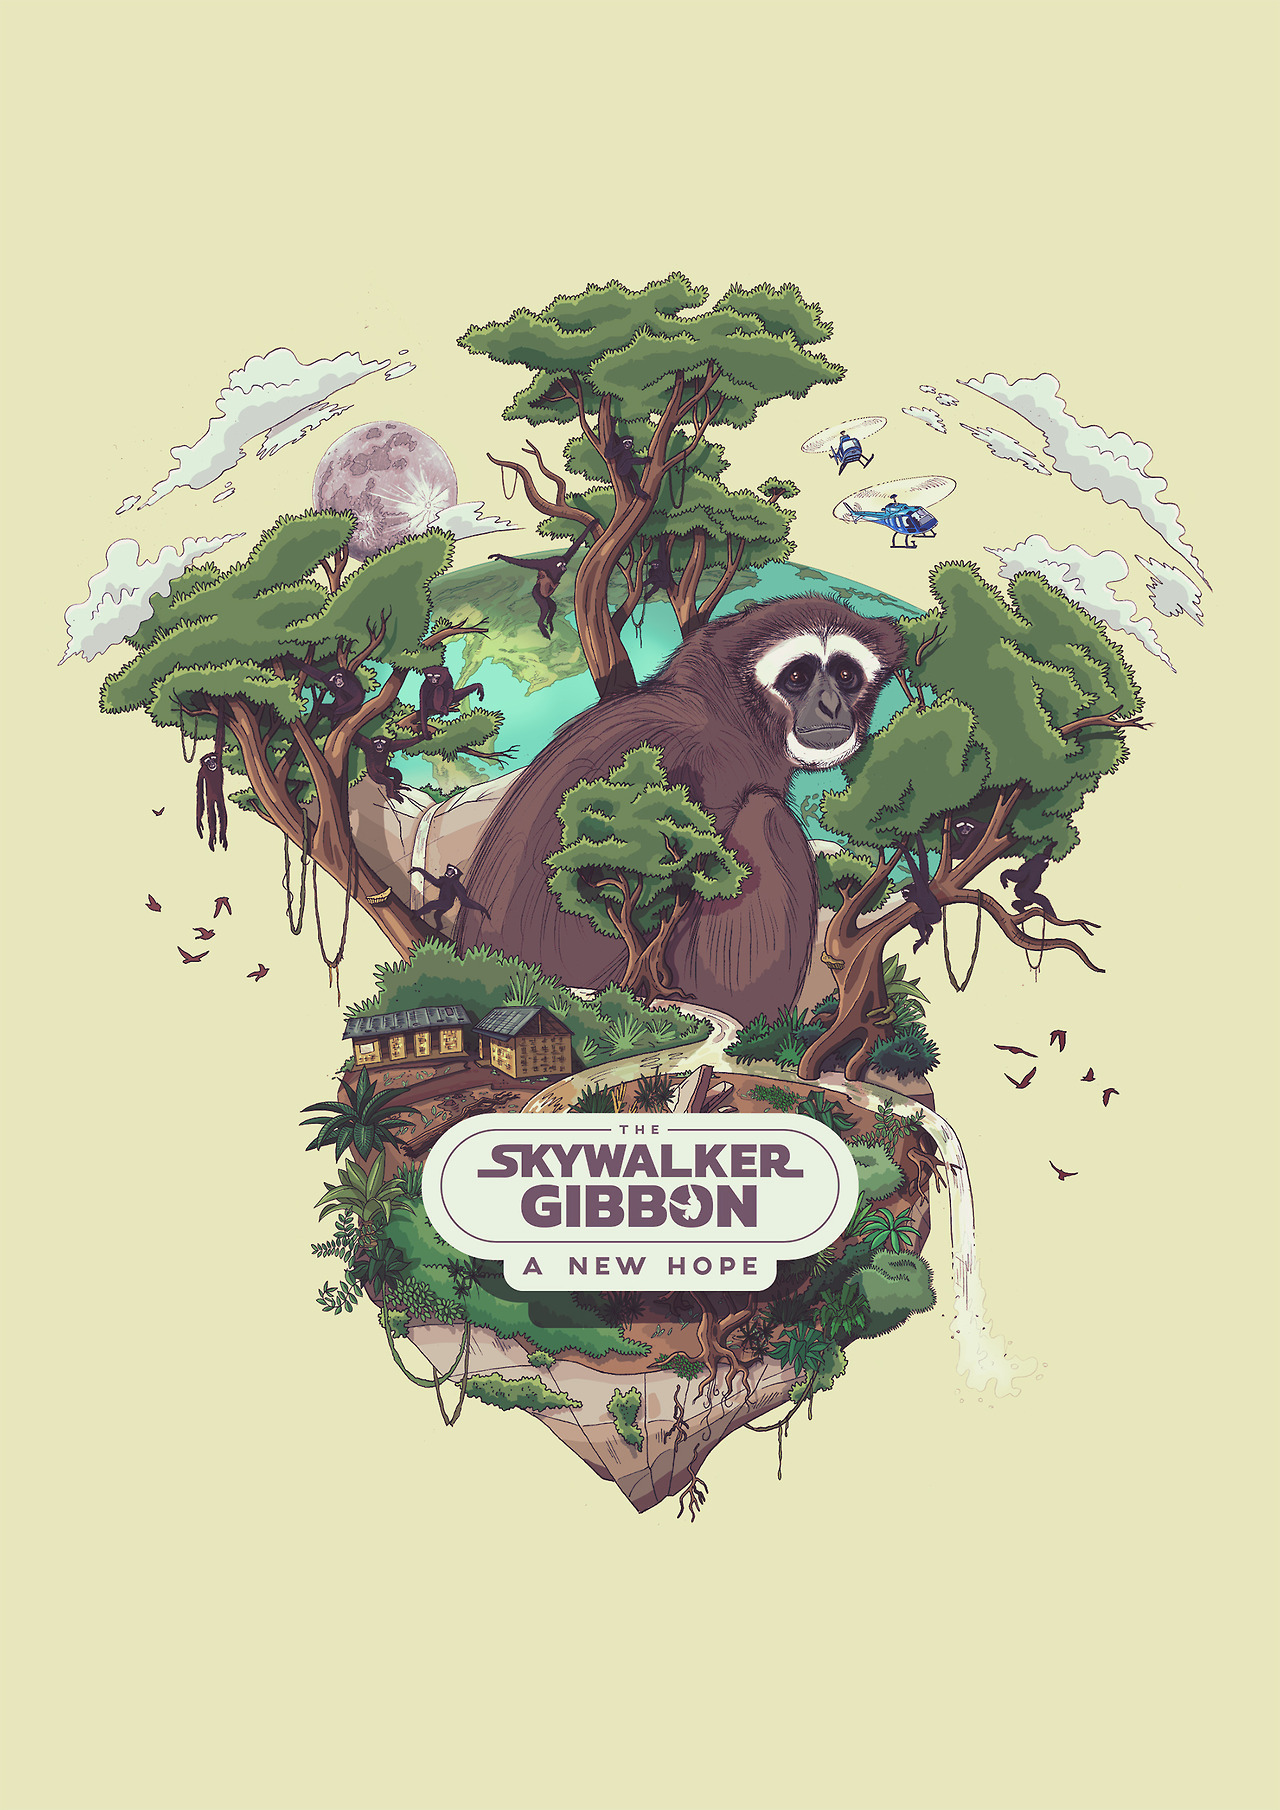 Skywalker Gibbons Need You! In 2017 a new species of gibbon, the Skywalker Hoolock (Hoolock tianxing), was discovered on the border between China and Myanmar. There are 20 gibbon species in total, of which, 19 are considered ‘endangered’ or...